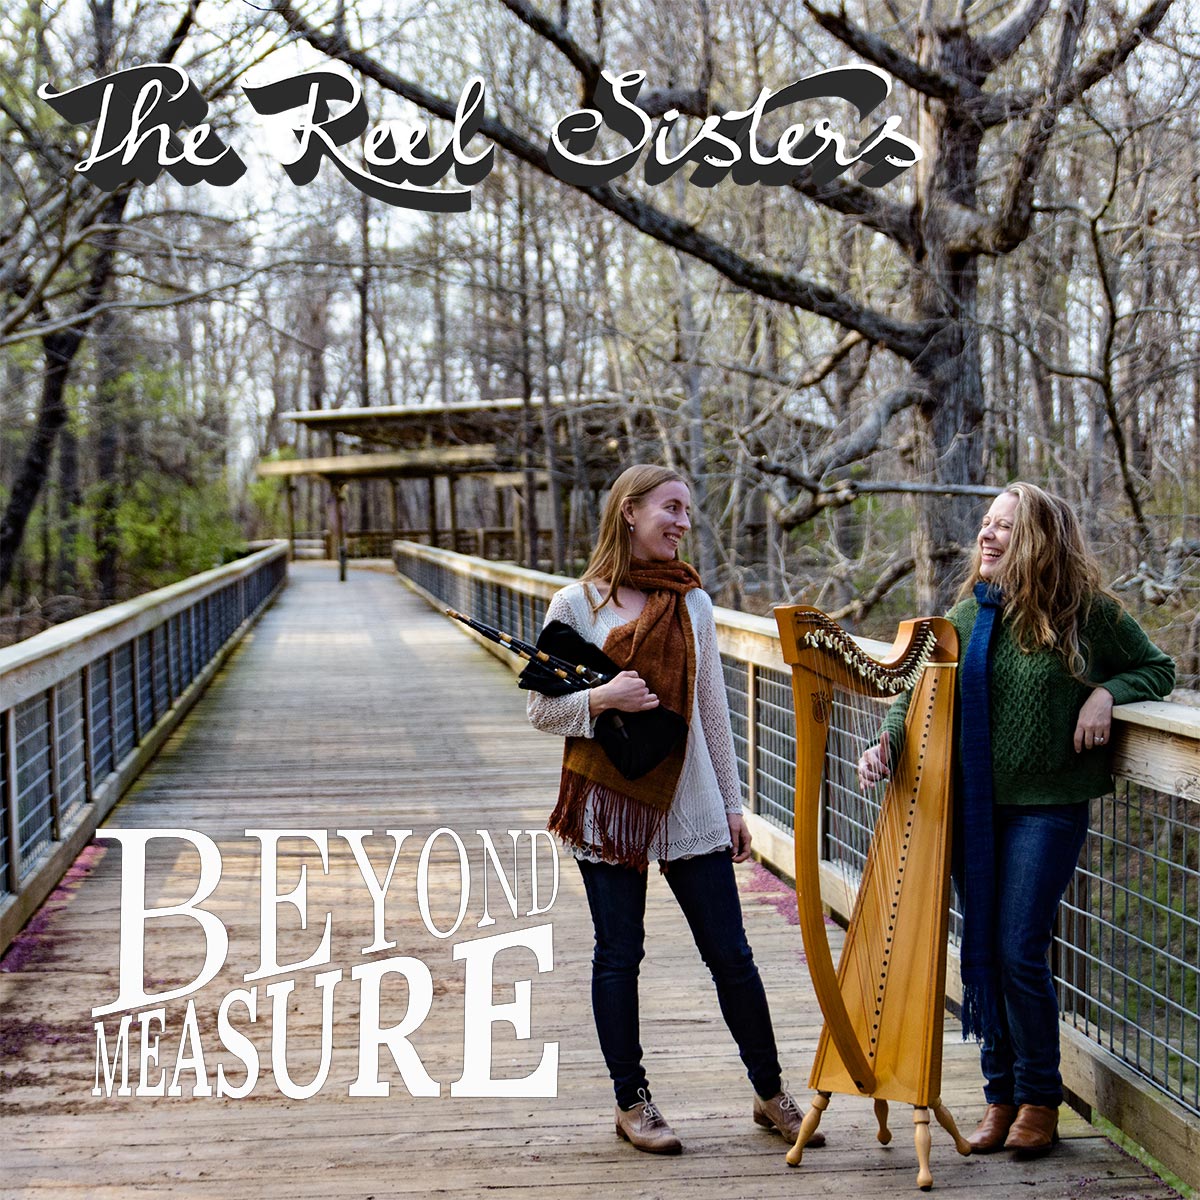 Beyond Measure CD cover. It says The Reel Sisters, Beyond Measure and has an image of Rosalind and Kelly on a bridge with their instruments.